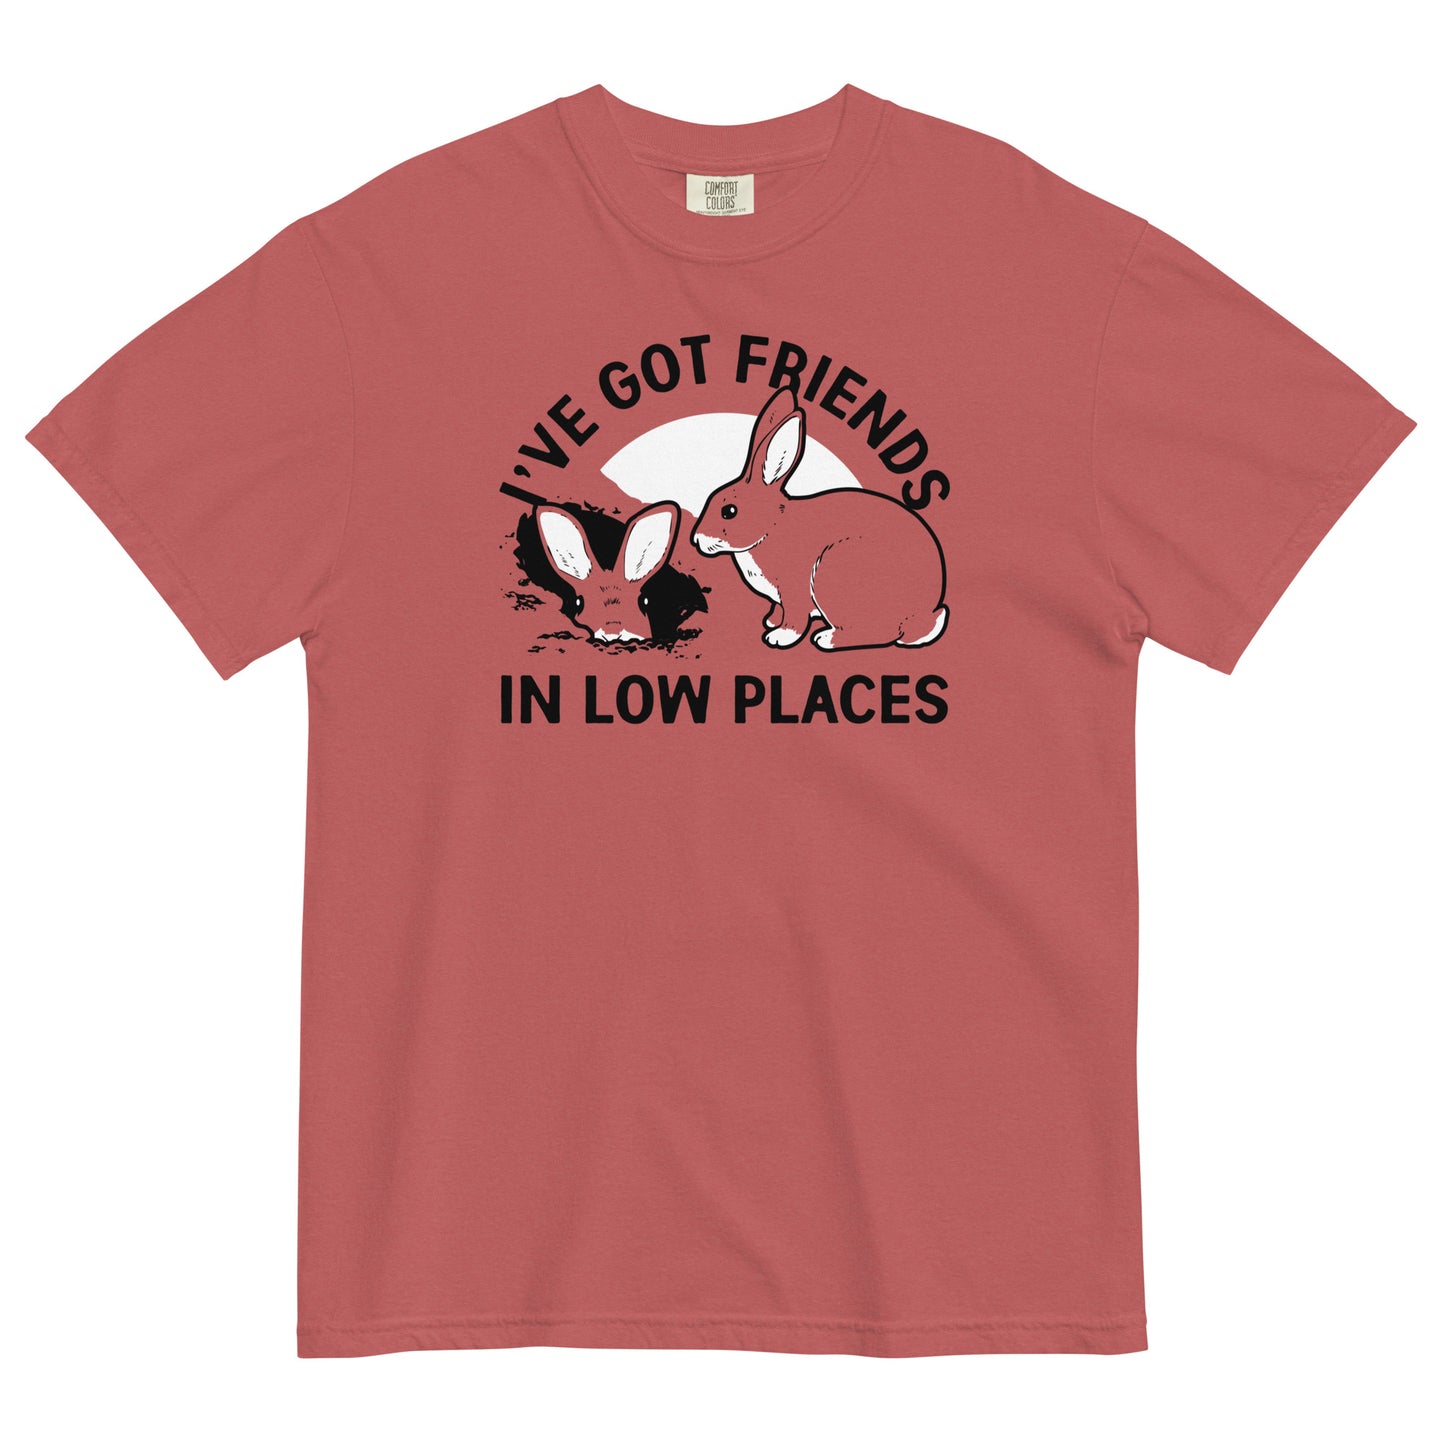 I've Got Friends In Low Places Men's Relaxed Fit Tee